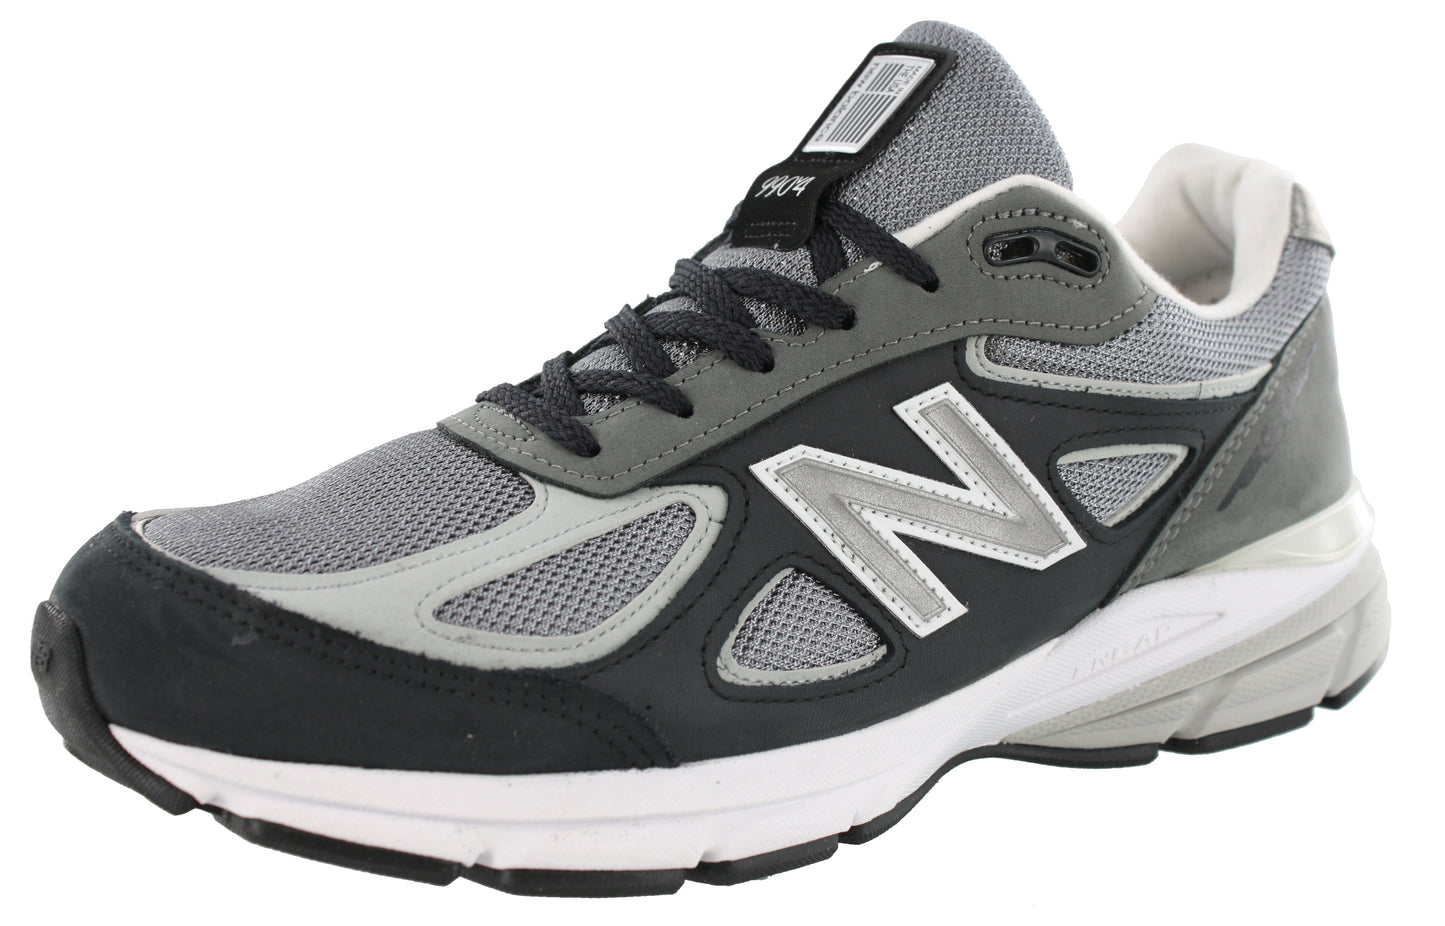 Lateral view of Magnet Grey and Silver Mink New Balance Cushioned Running Shoes